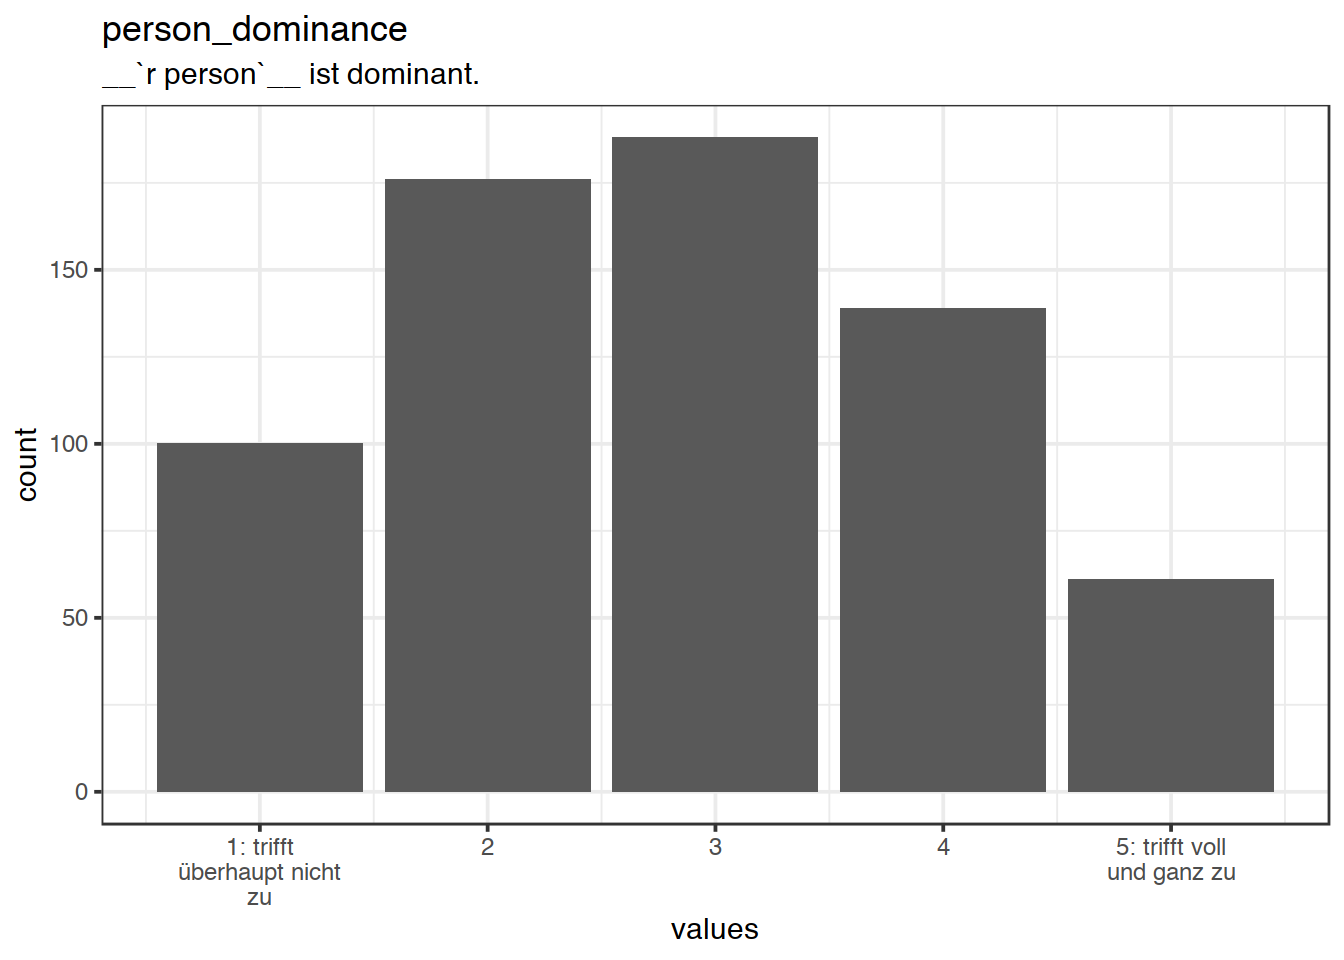 Distribution of values for person_dominance